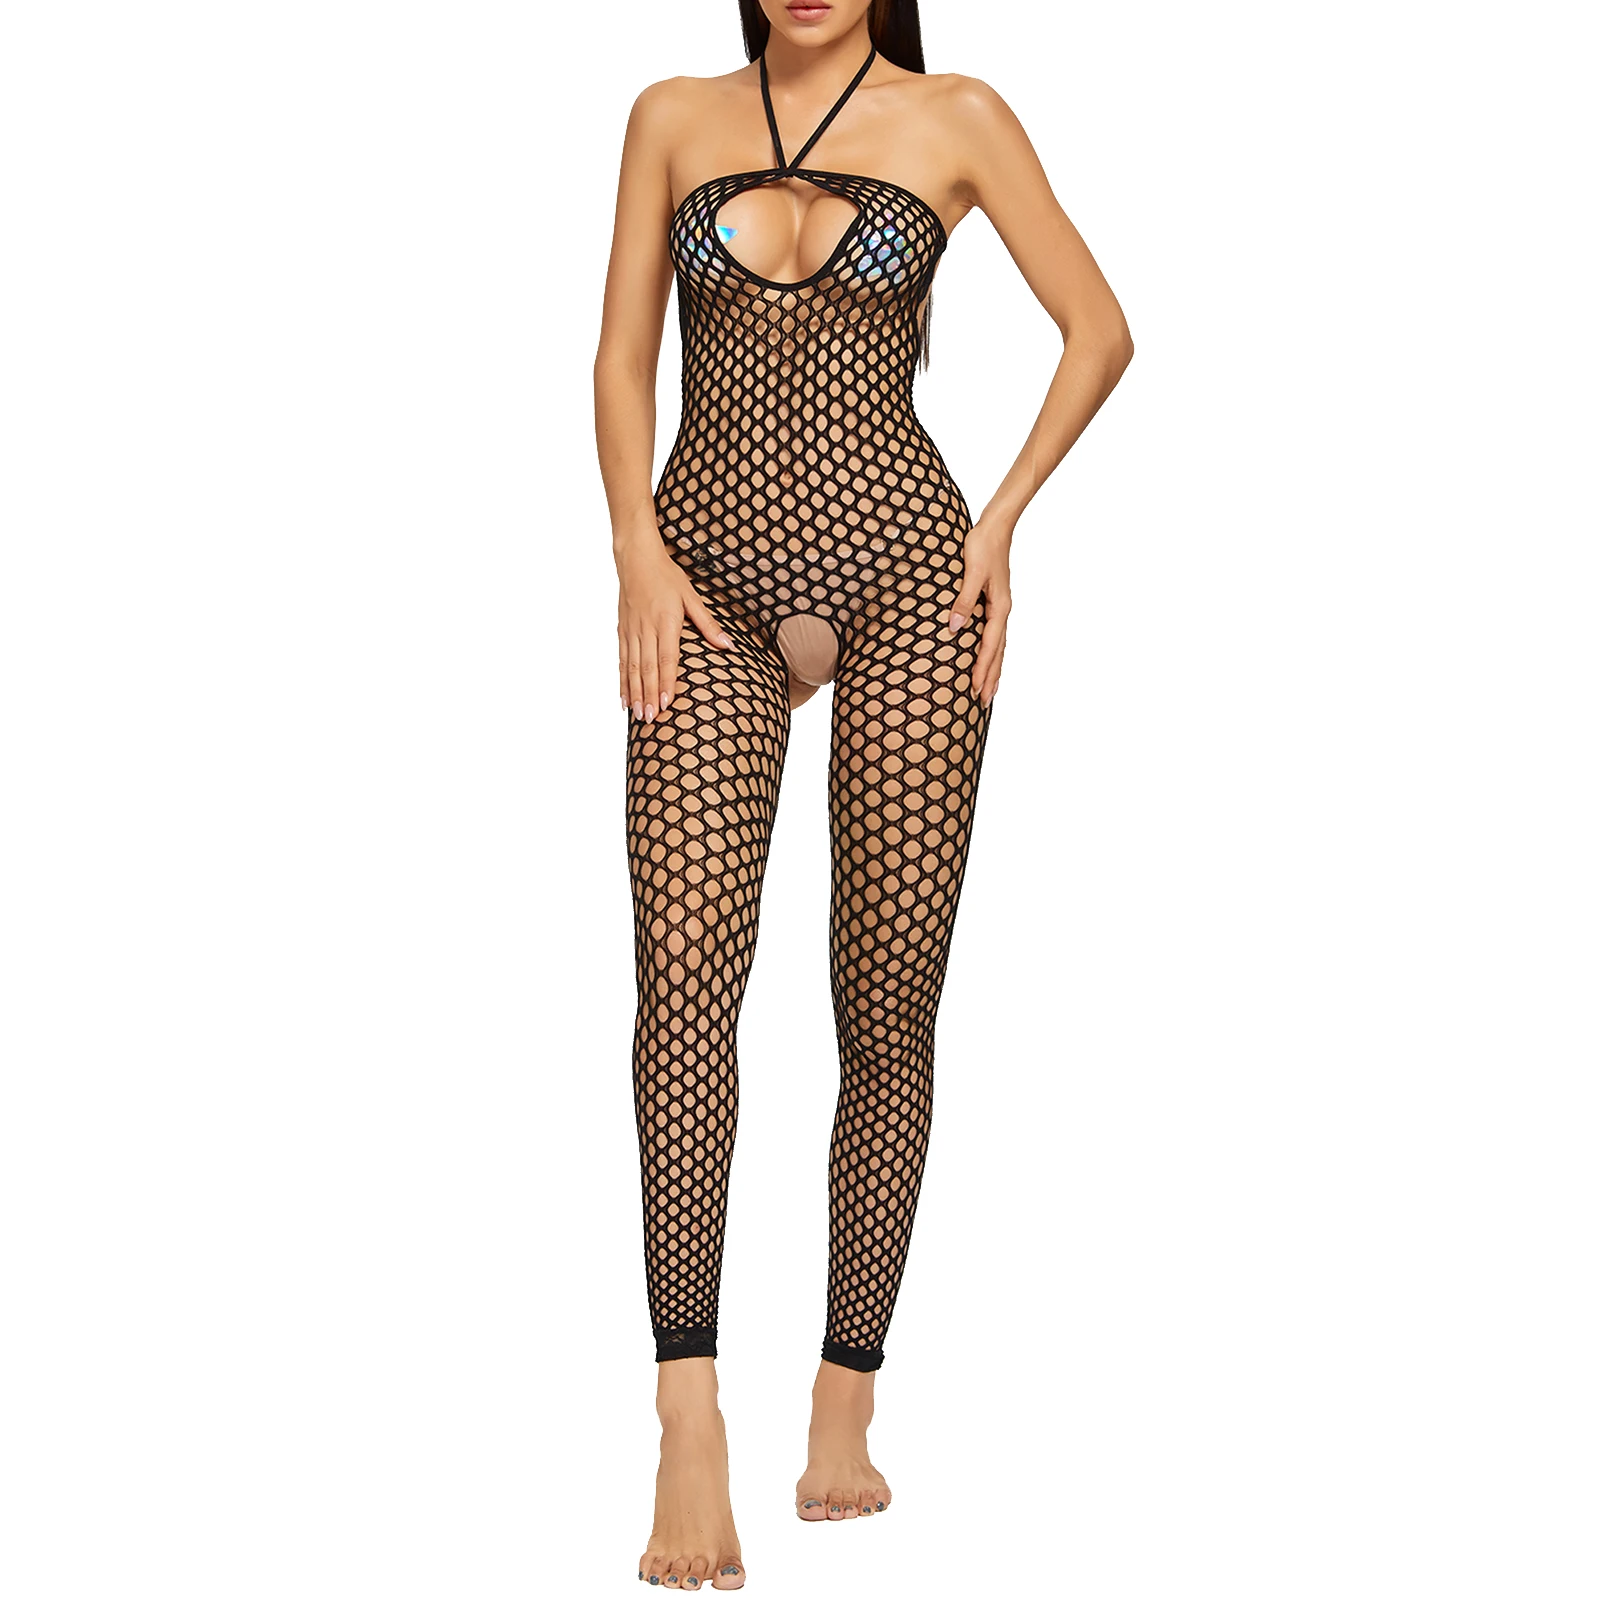 

Women Sexy Lingerie Hollow Out Fishnet Jumpsuit Sleeveless Crotchless Bodysuit Nightwear See-through Mesh Leotard Bodystocking